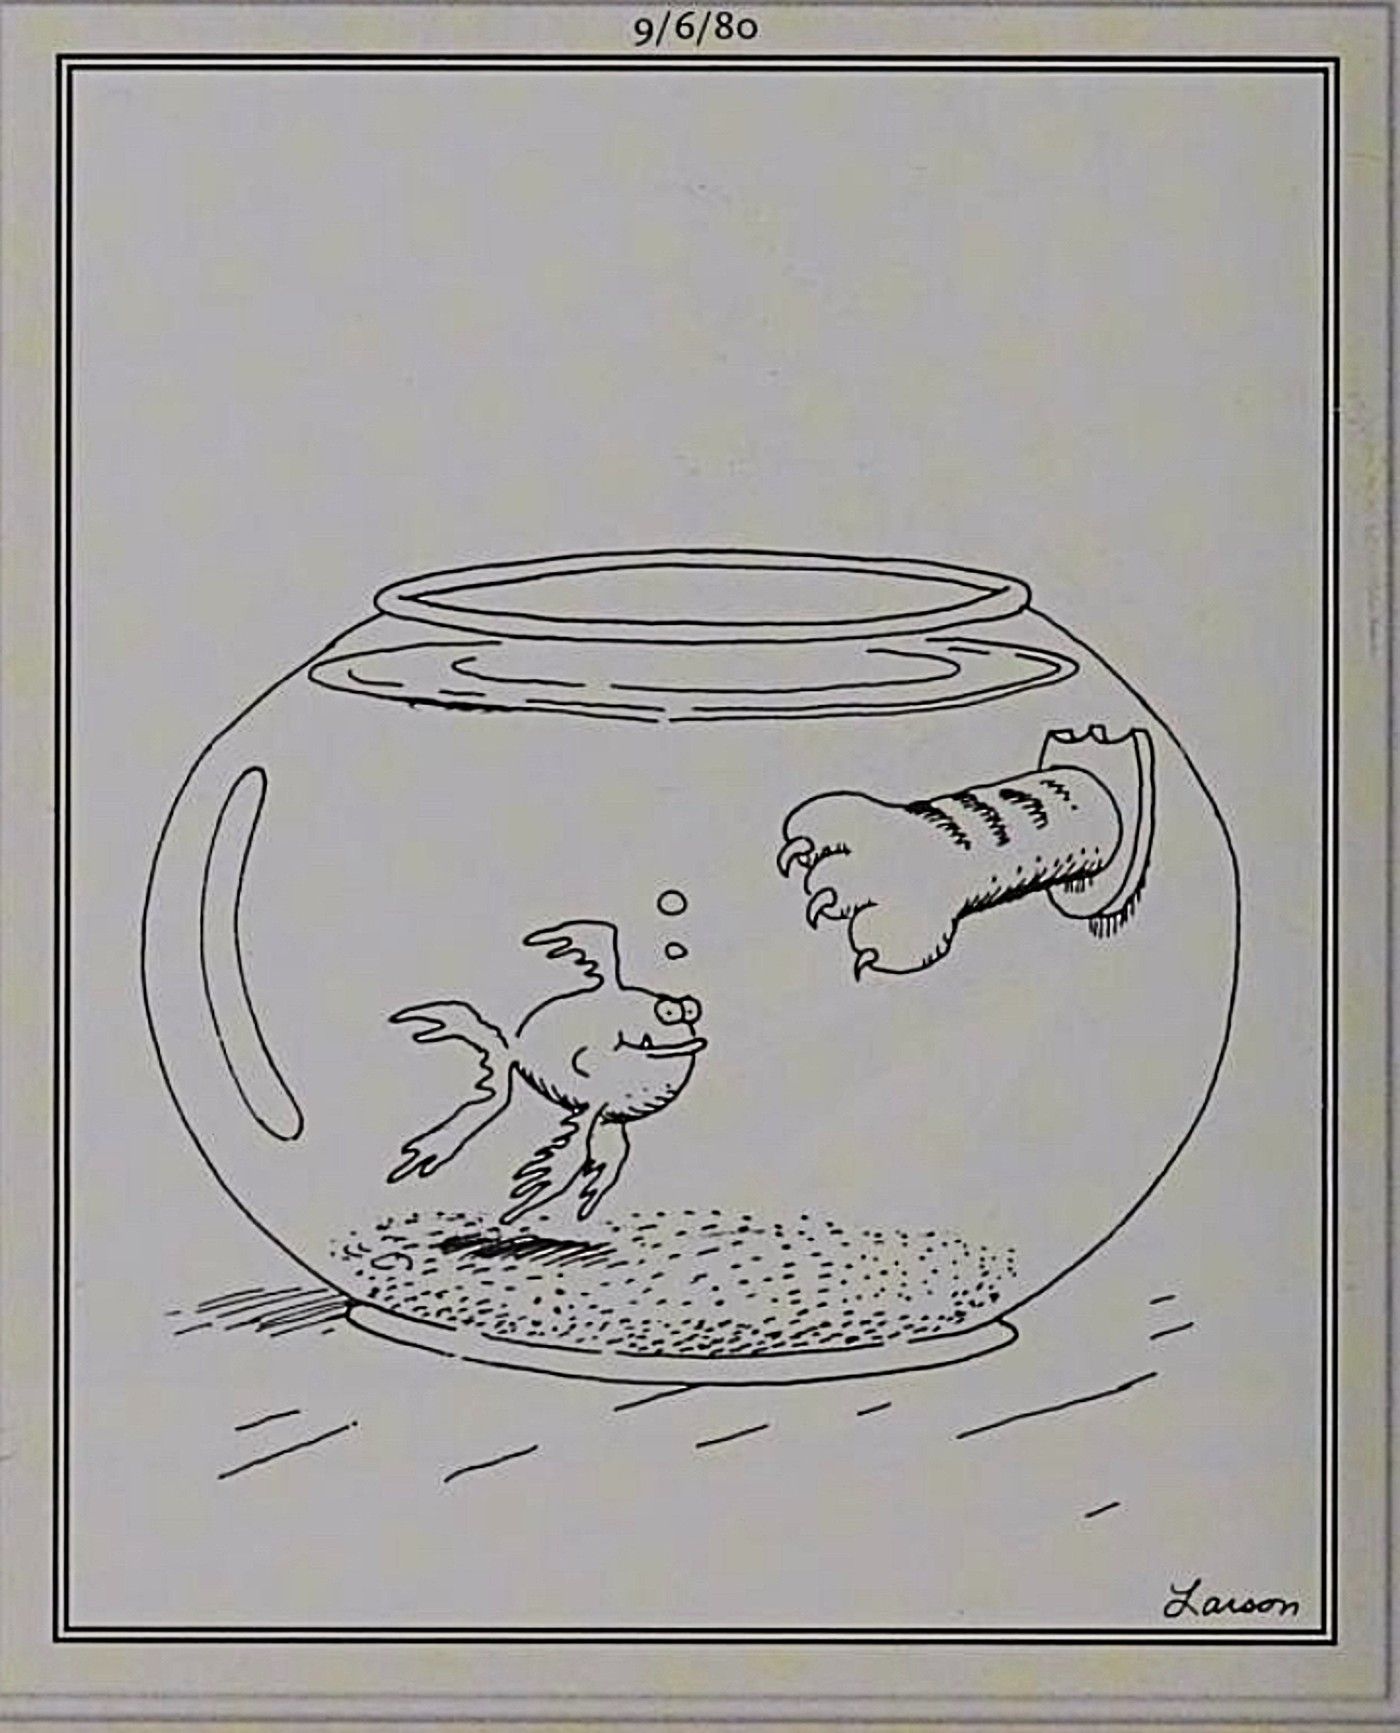 Far Side, goldfish with cat paw mounted to inside of its bowl